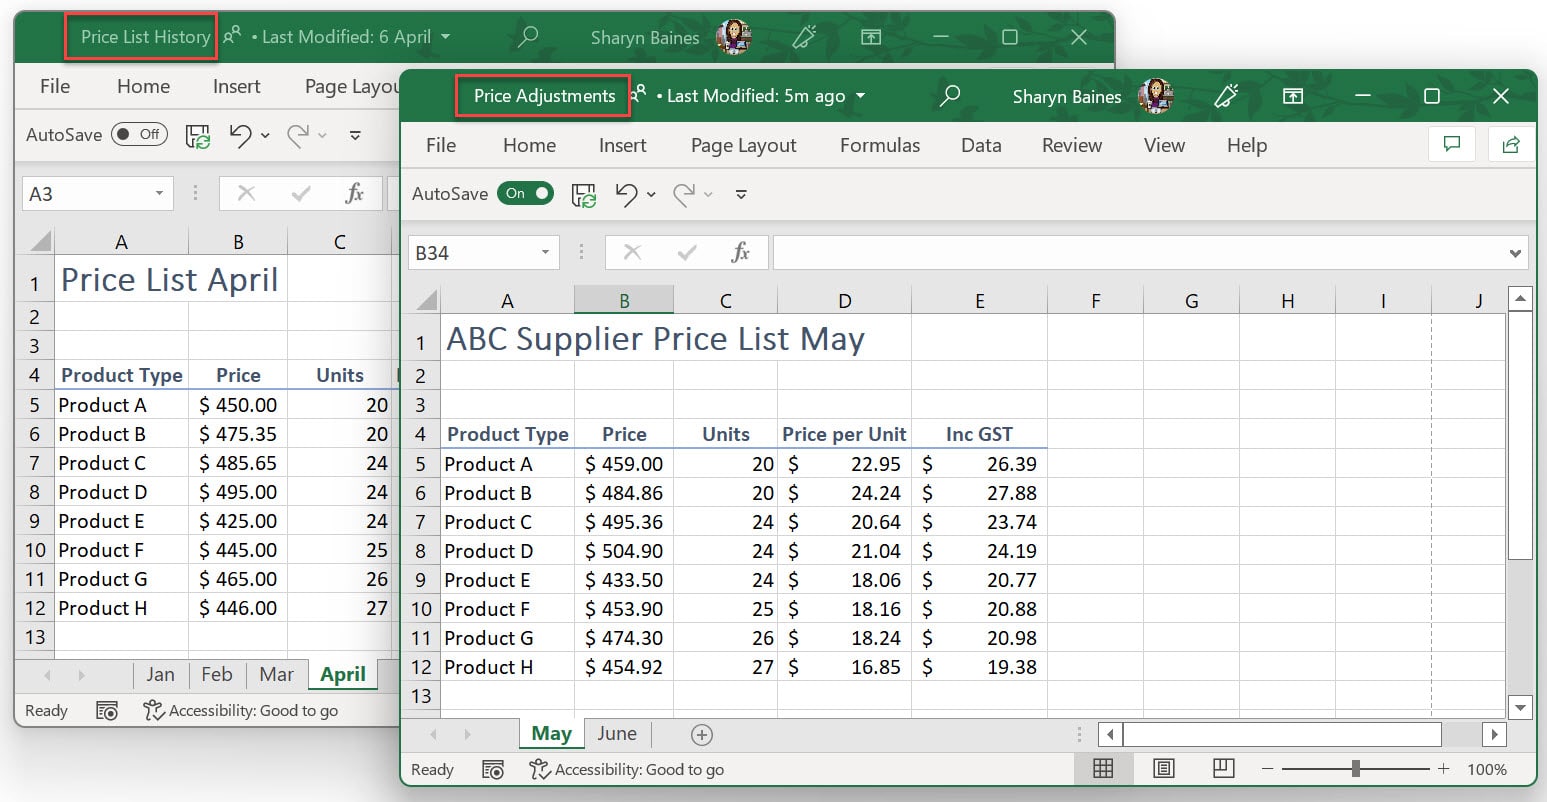 Two workbooks open, Price list history and Price adjustments